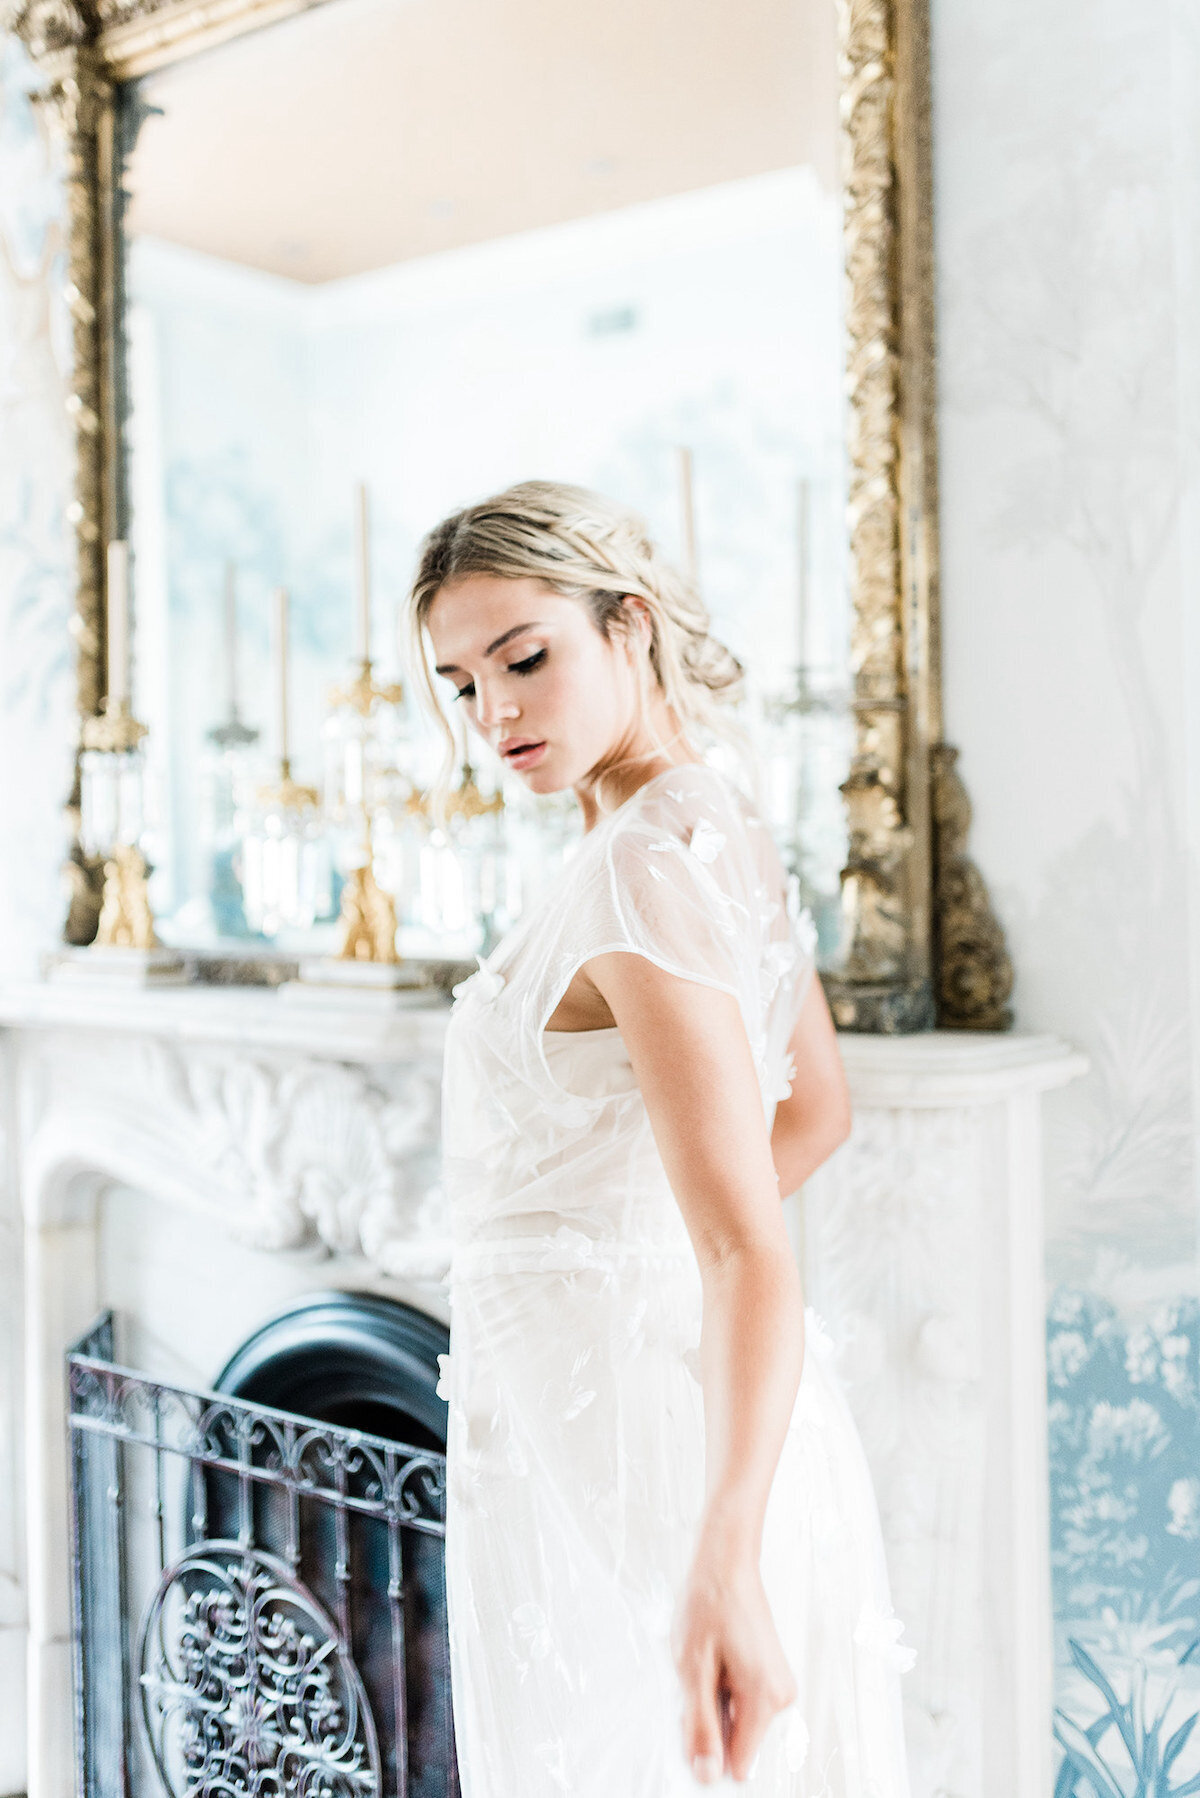 Unveil the world of couture couture through our lens. Our high-end bridal fashion photography captures the intricacies of design and the essence of luxury, offering a glimpse into the heart of haute couture.